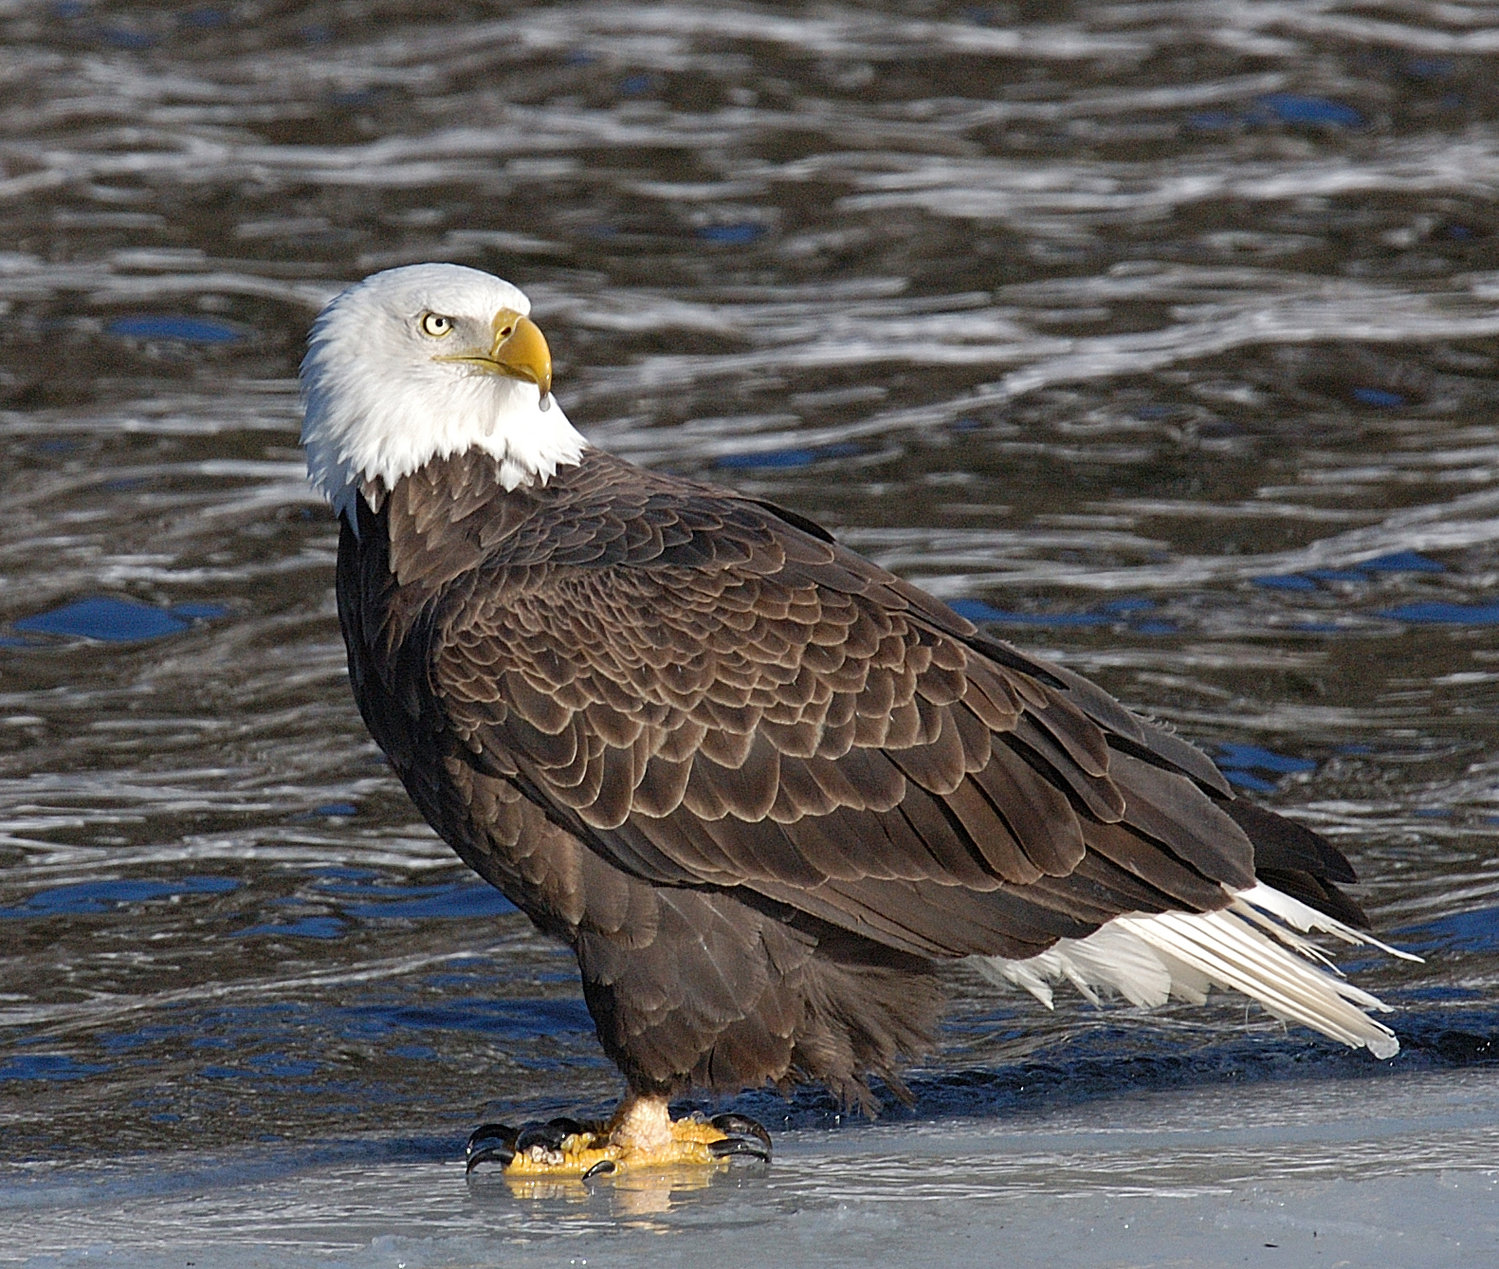 This bald eagle is on an ice shelf along the Delaware River. For a good spot to see eagles, look for open water, where the birds can forage for their favorite food—fish. The Mongaup reservoir system is also a good place to spot eagles. You might get lucky and see a wintering golden eagle fly over some of these areas. Mature golden eagles are frequently confused with immature bald eagles—they are both brown. Look for the iridescent copper-colored plumage on the head of the golden eagle.